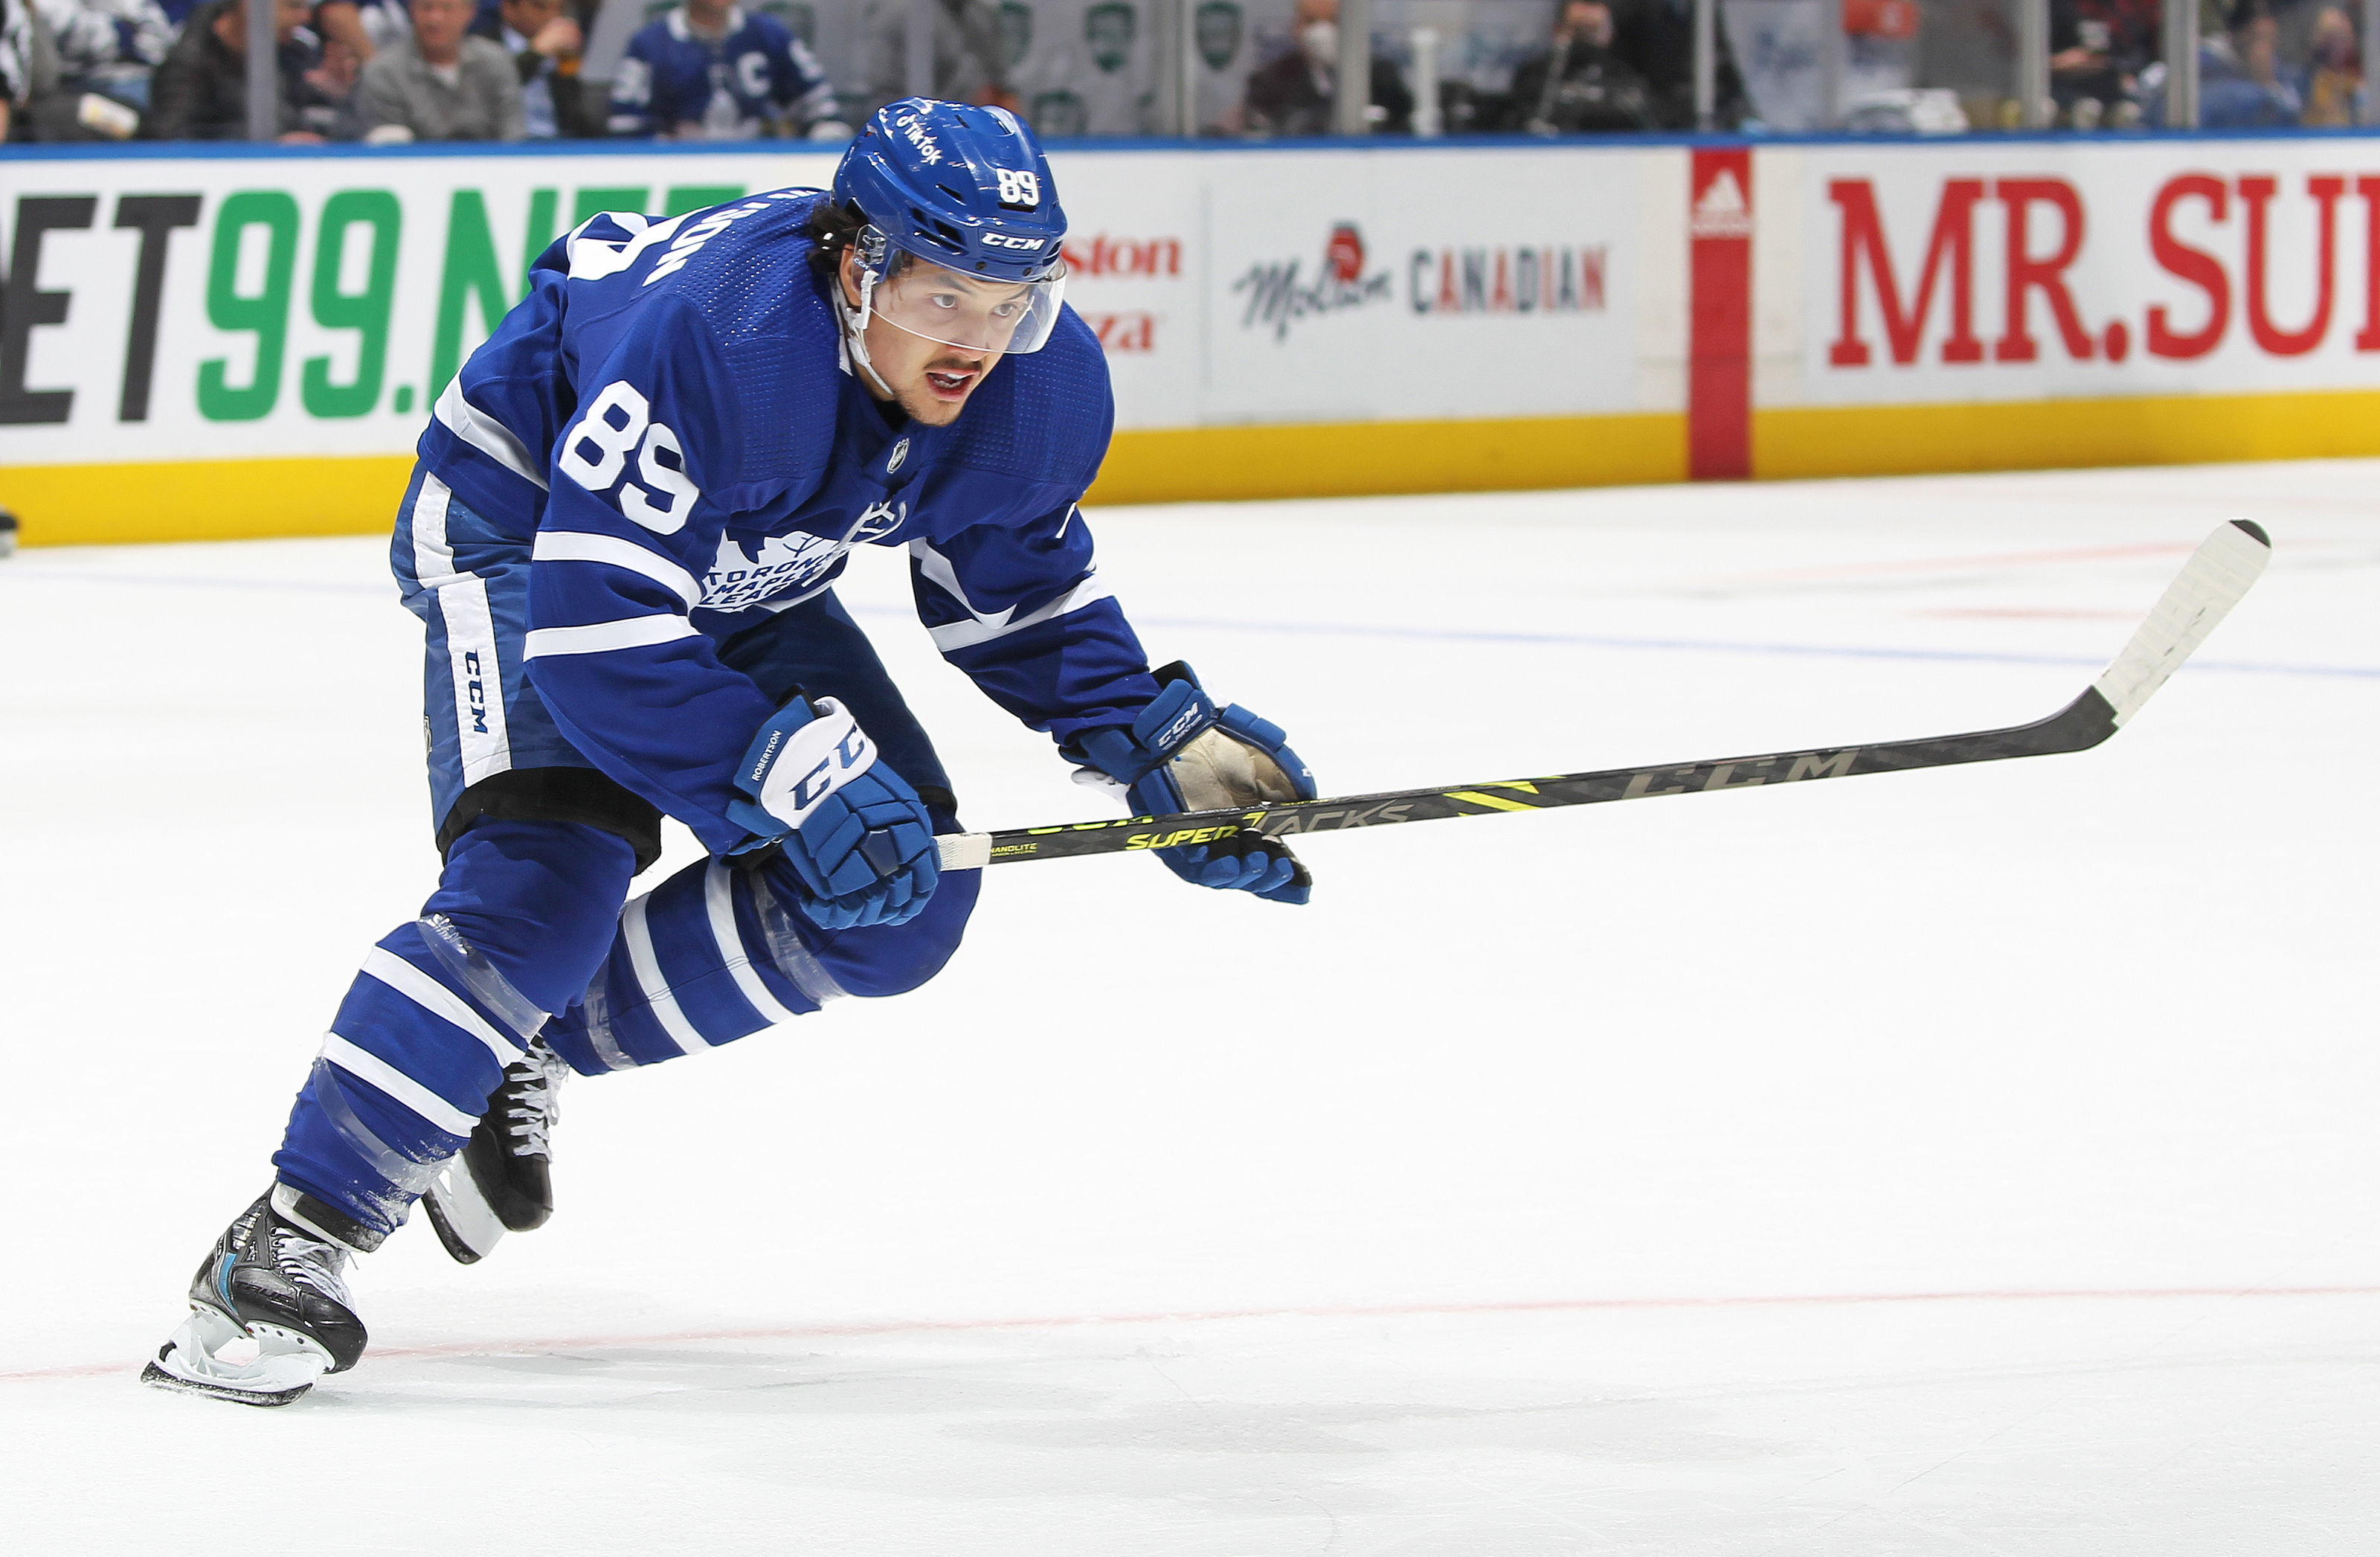 Toronto Maple Leafs: Sandin sent to Marlies, roster trimmed further